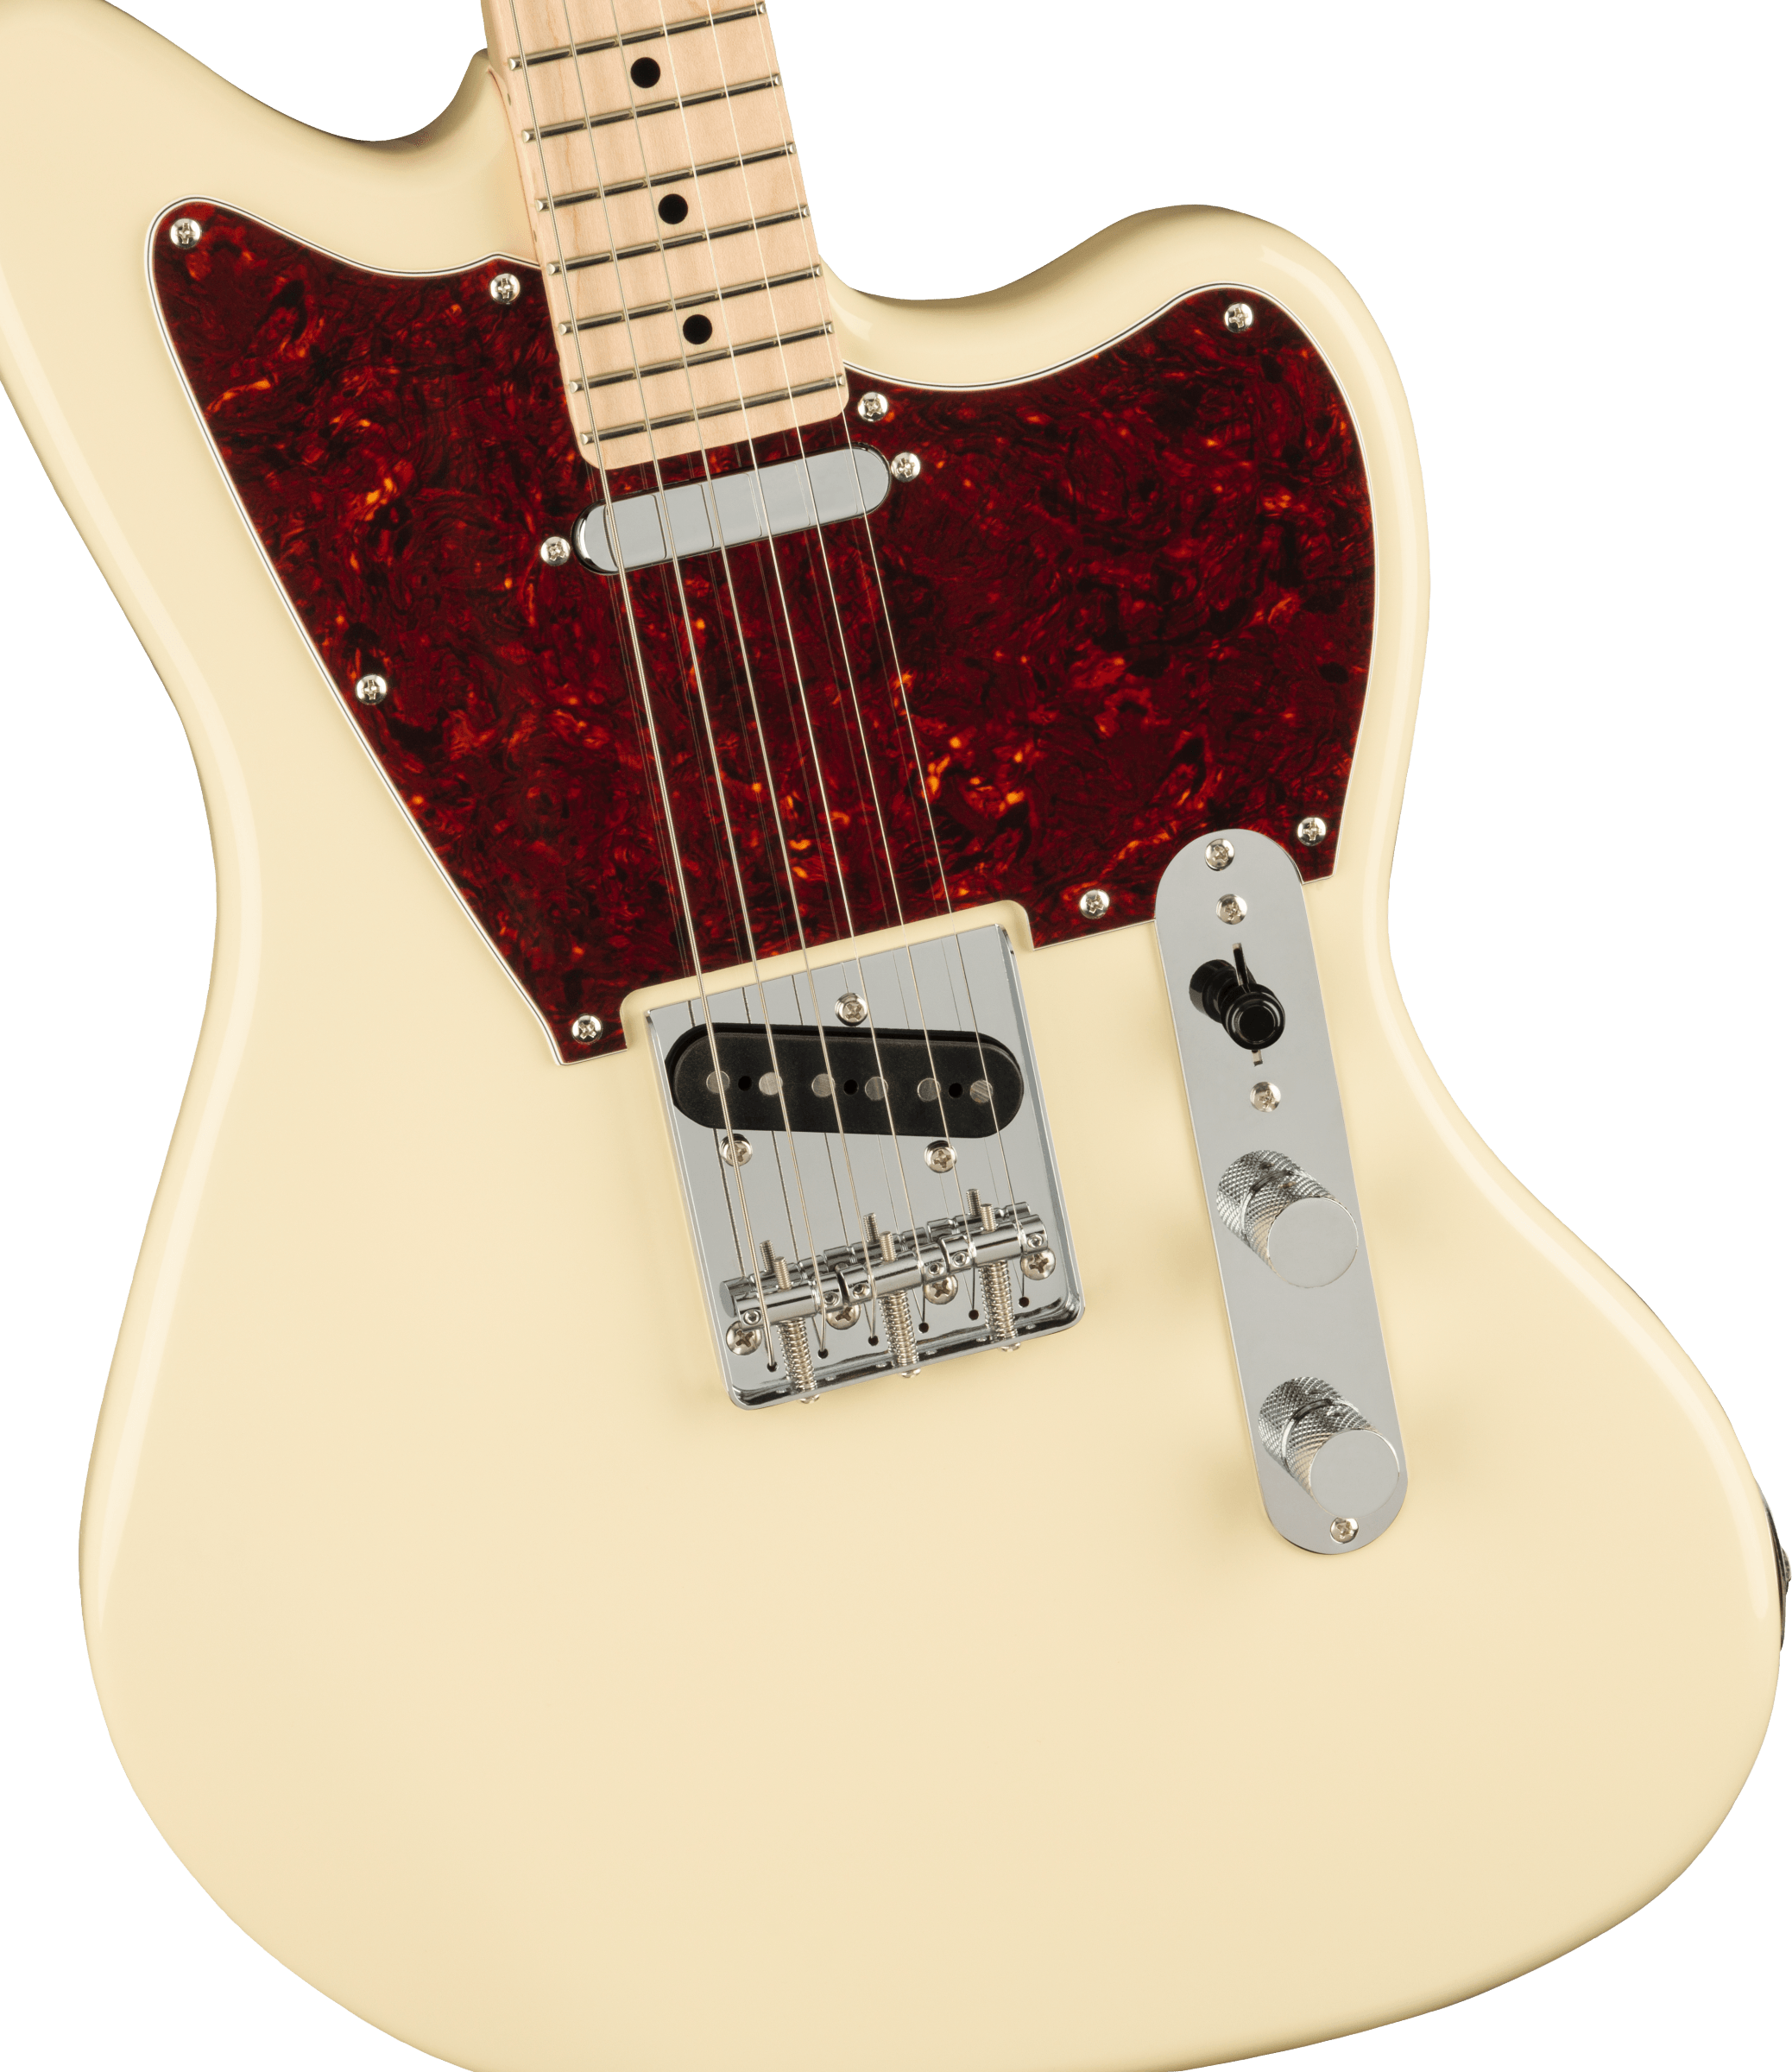 Squier Tele Offset Paranormal Ss Ht Mn - Olympic White - Retro rock electric guitar - Variation 2